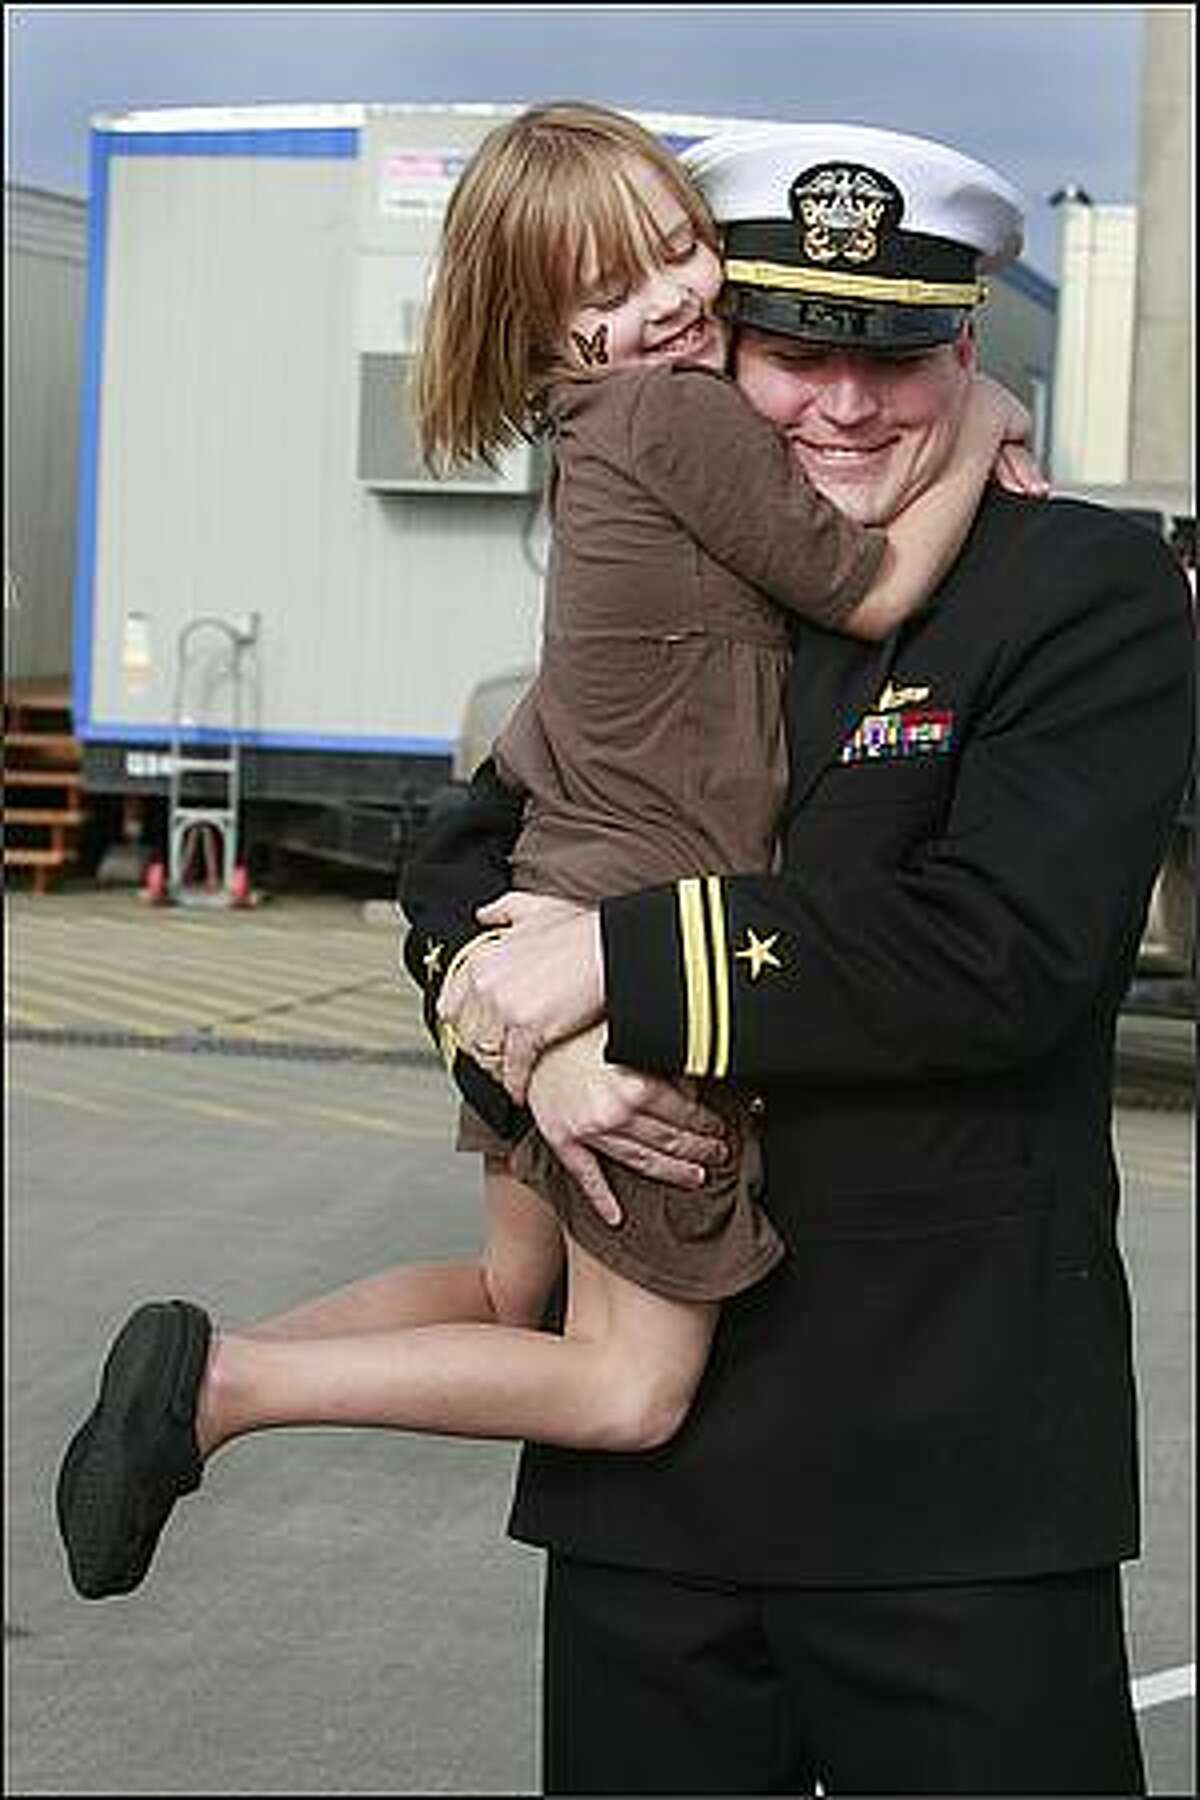 Colleen Huchton, 6, hugs her dad, LTjg Scott Huchton as he arrives home after a seven month deployment on the USS Abraham Lincoln.